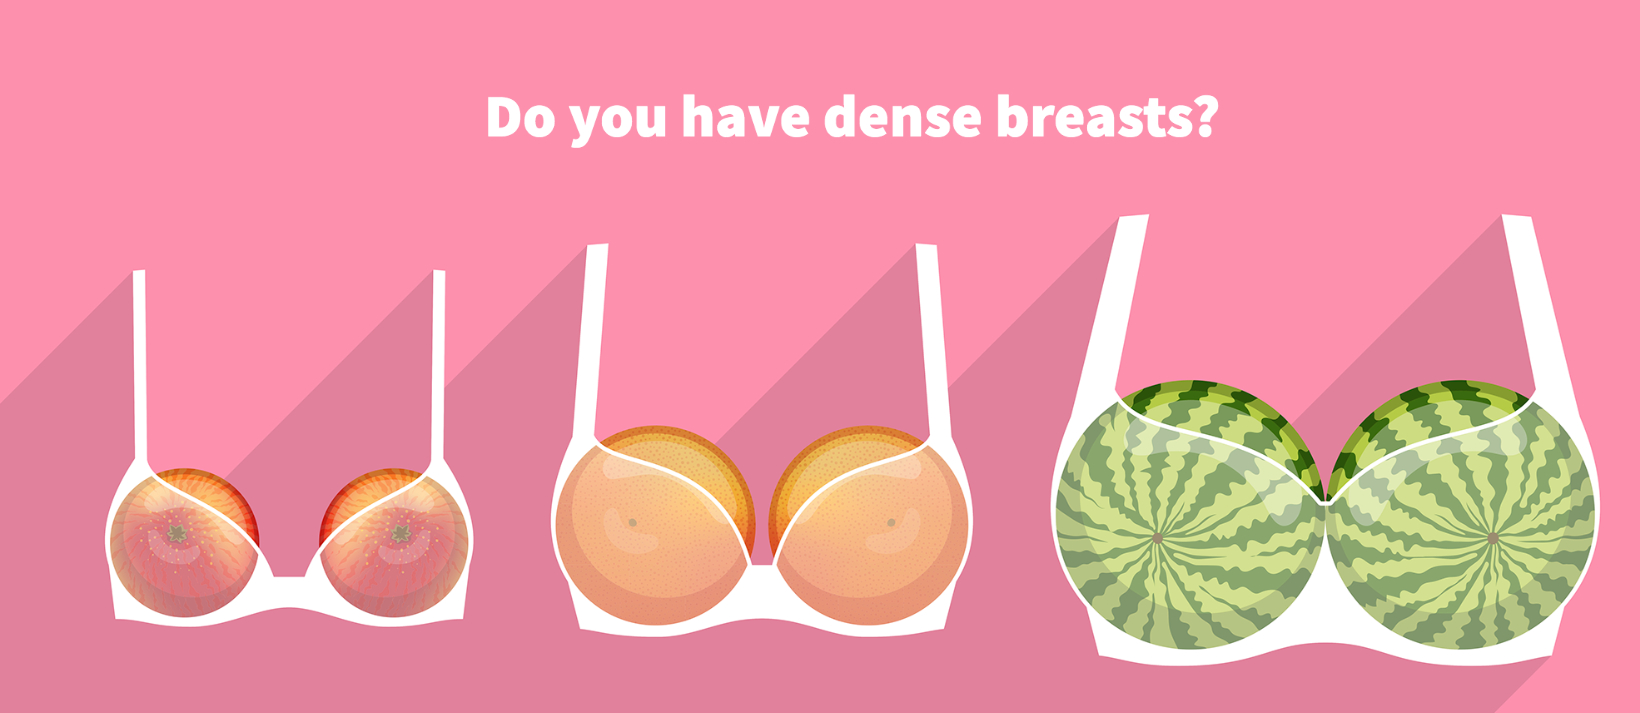 What are dense breasts, and why is it important for women to know